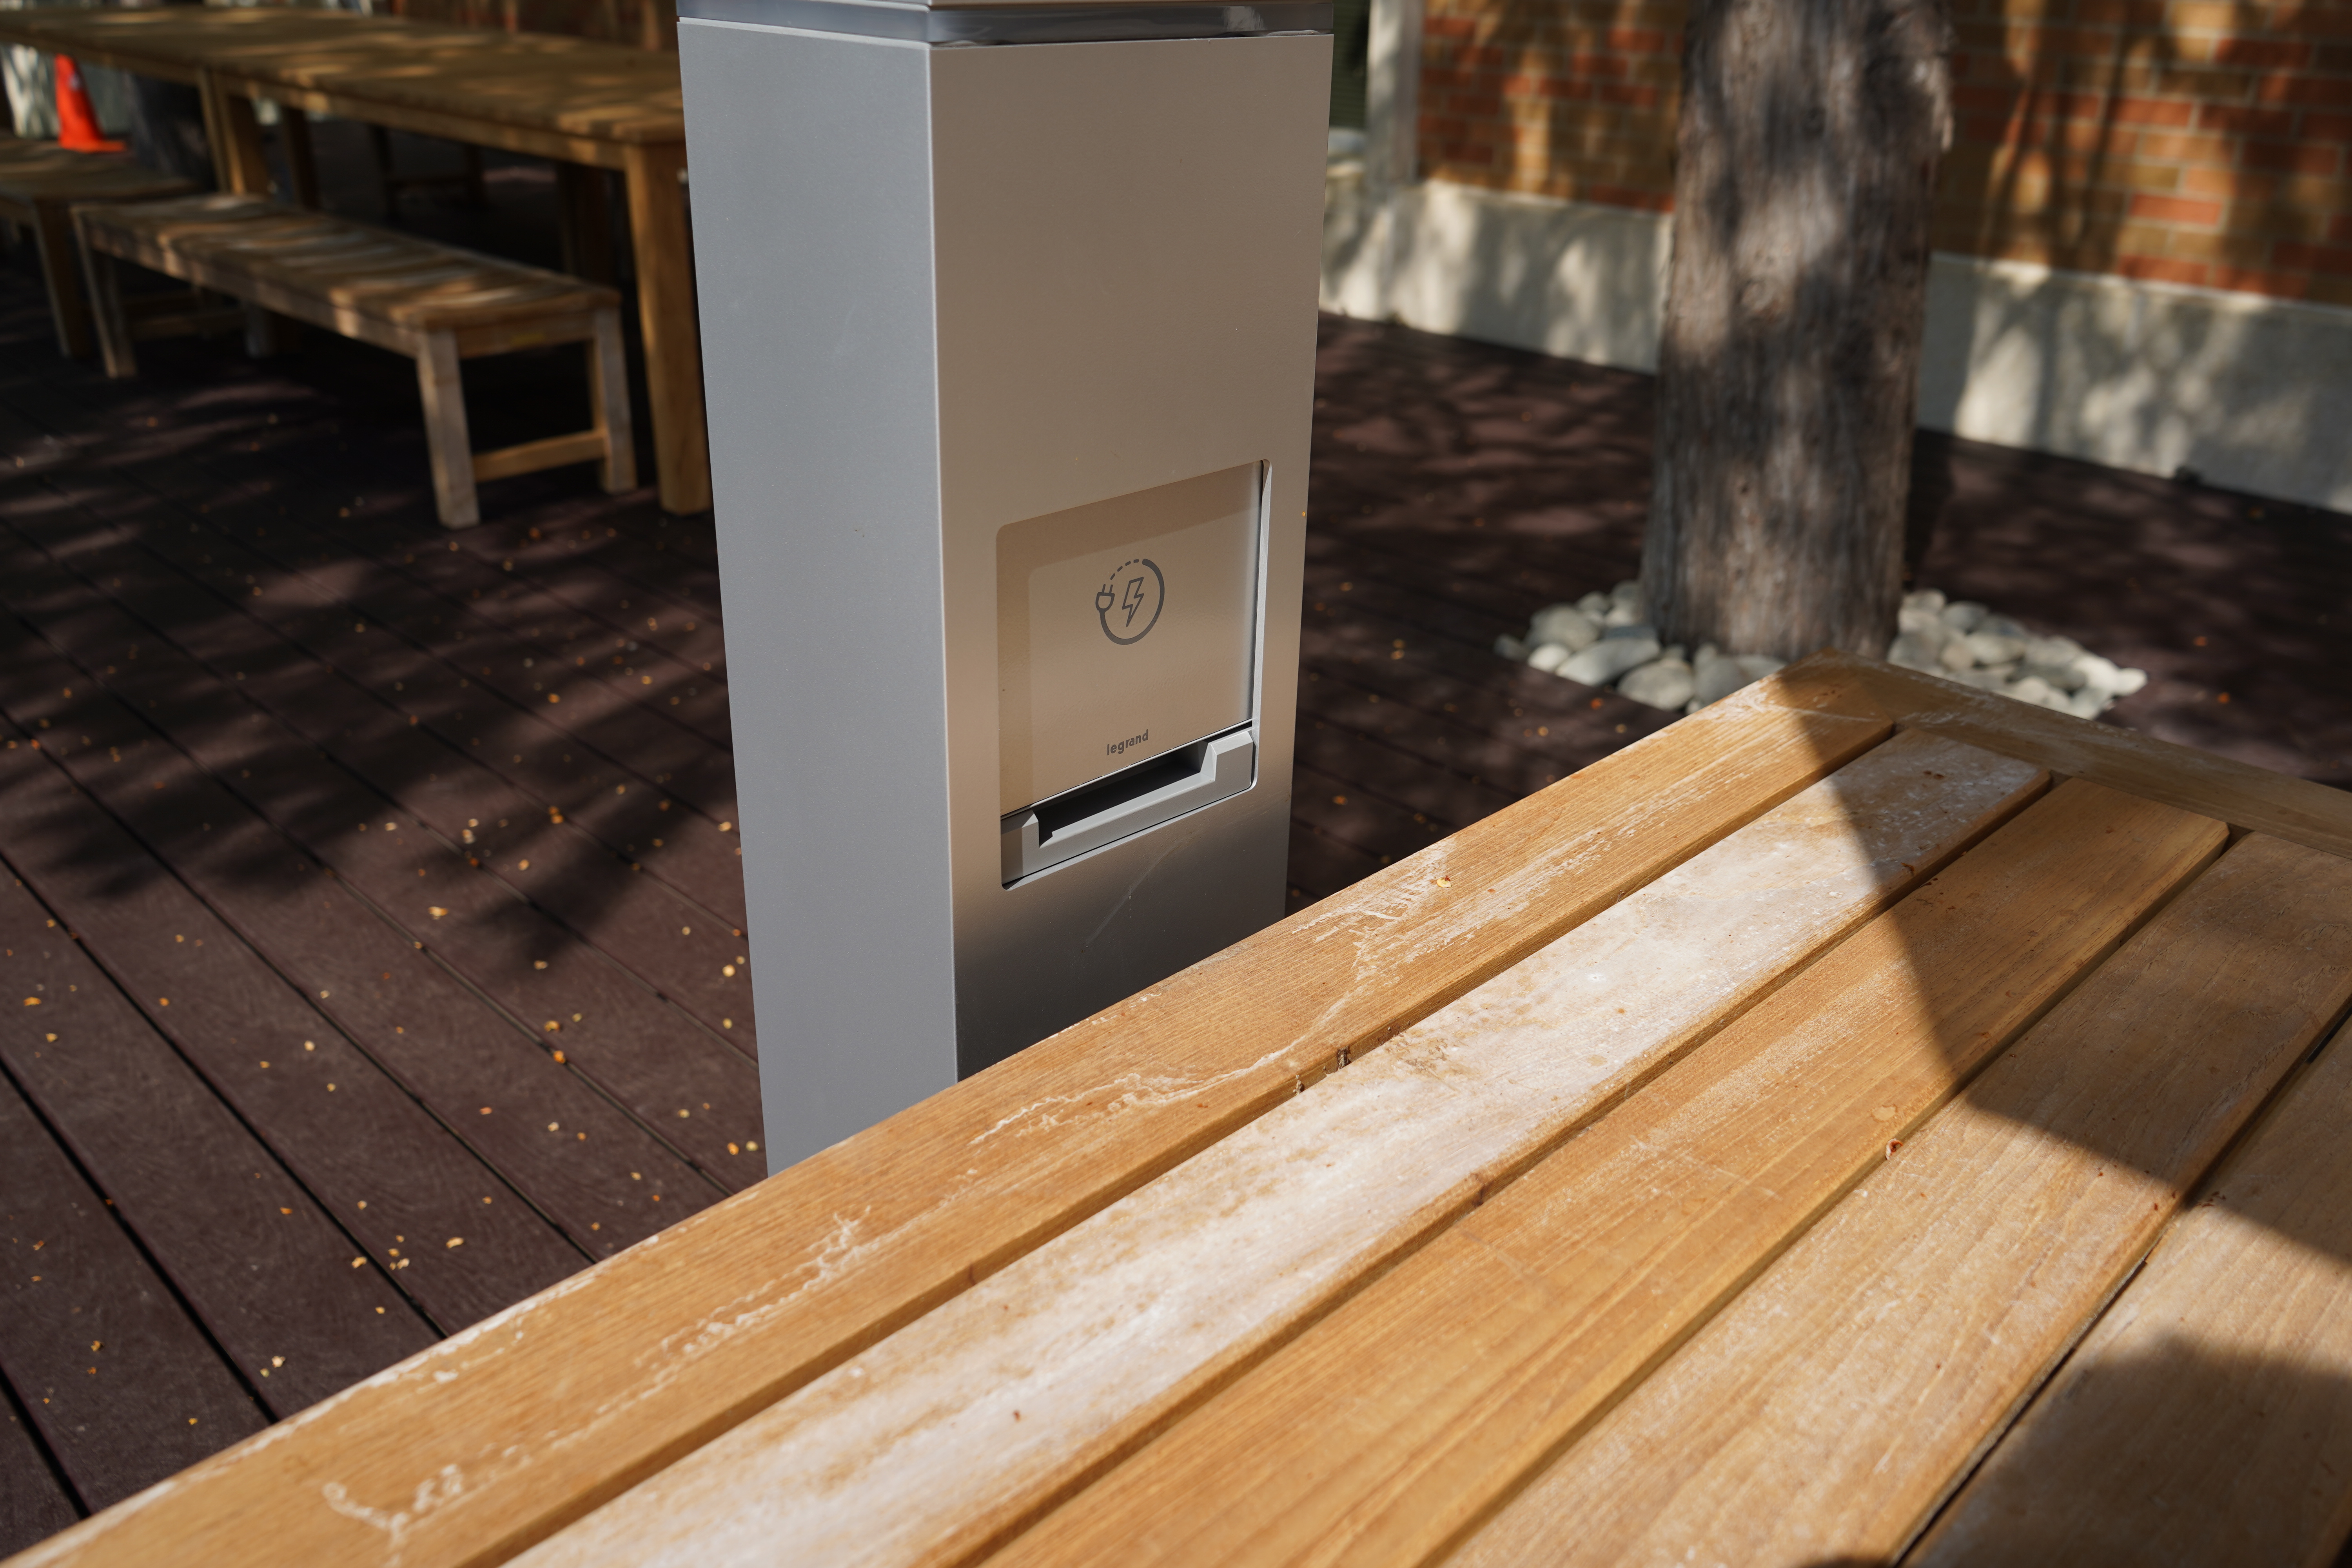 a charging station at the end of a wood table; a new deck can be seen in the background